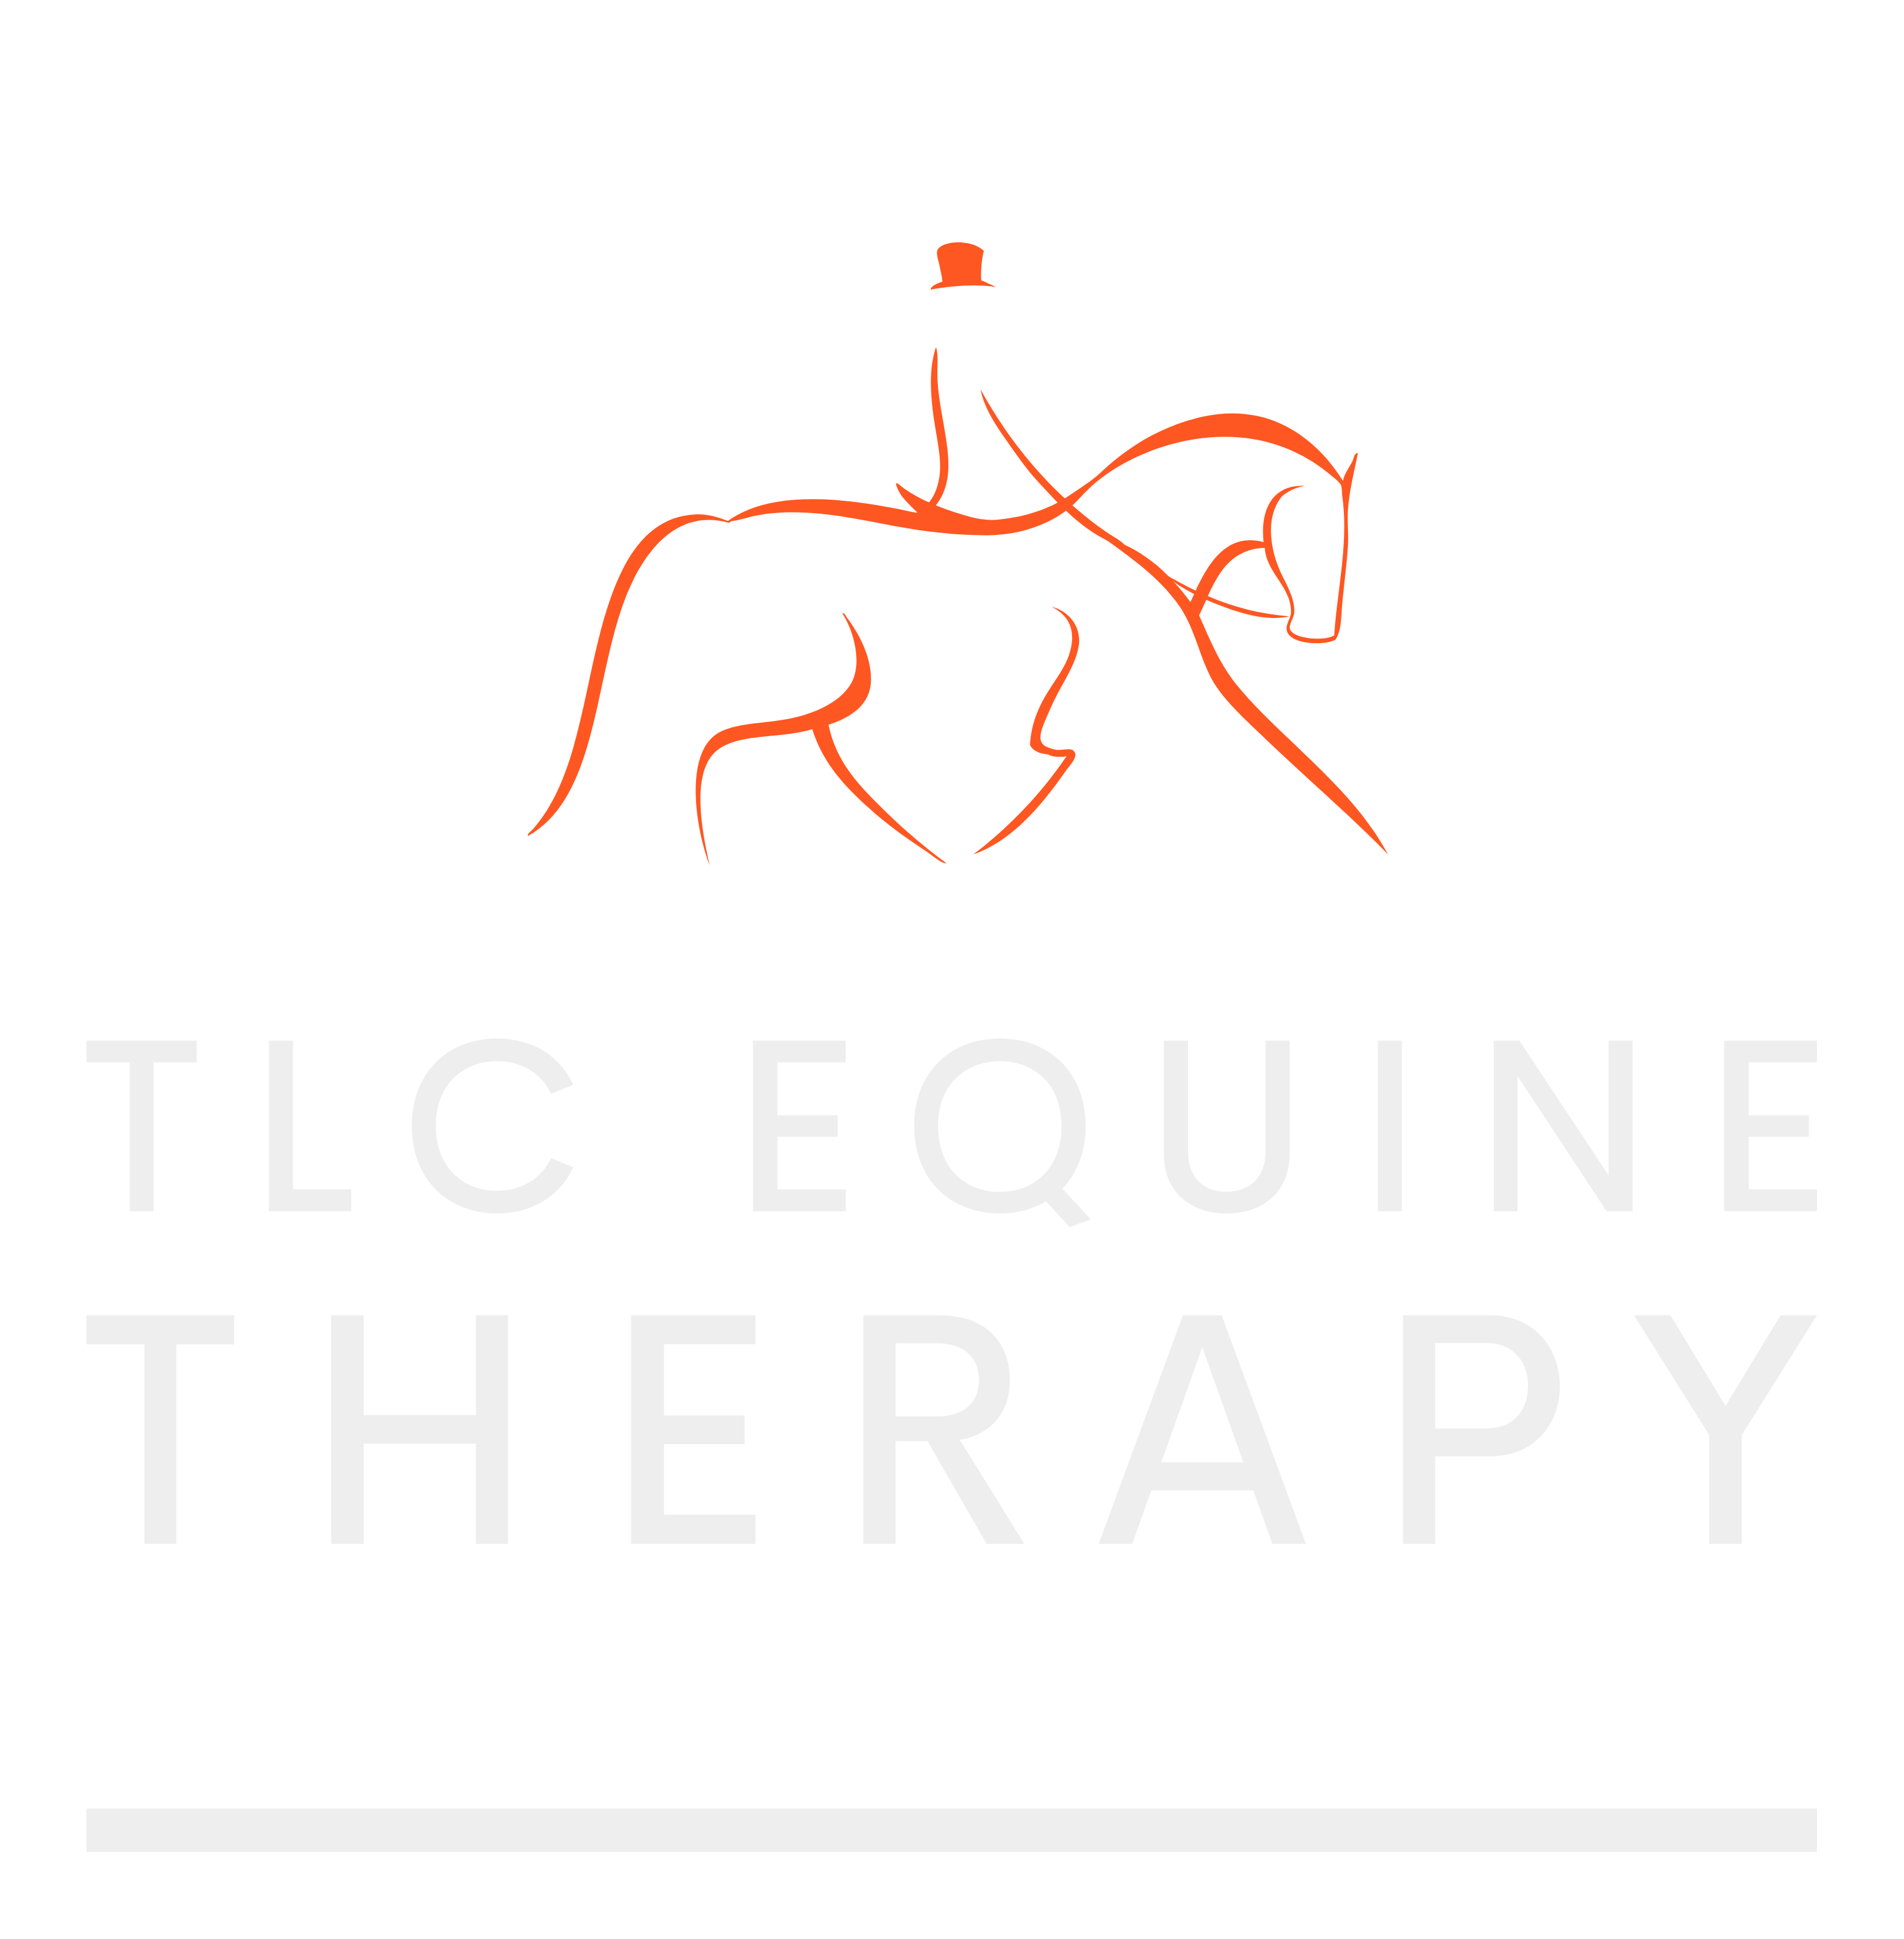 TLC Equine Therapy